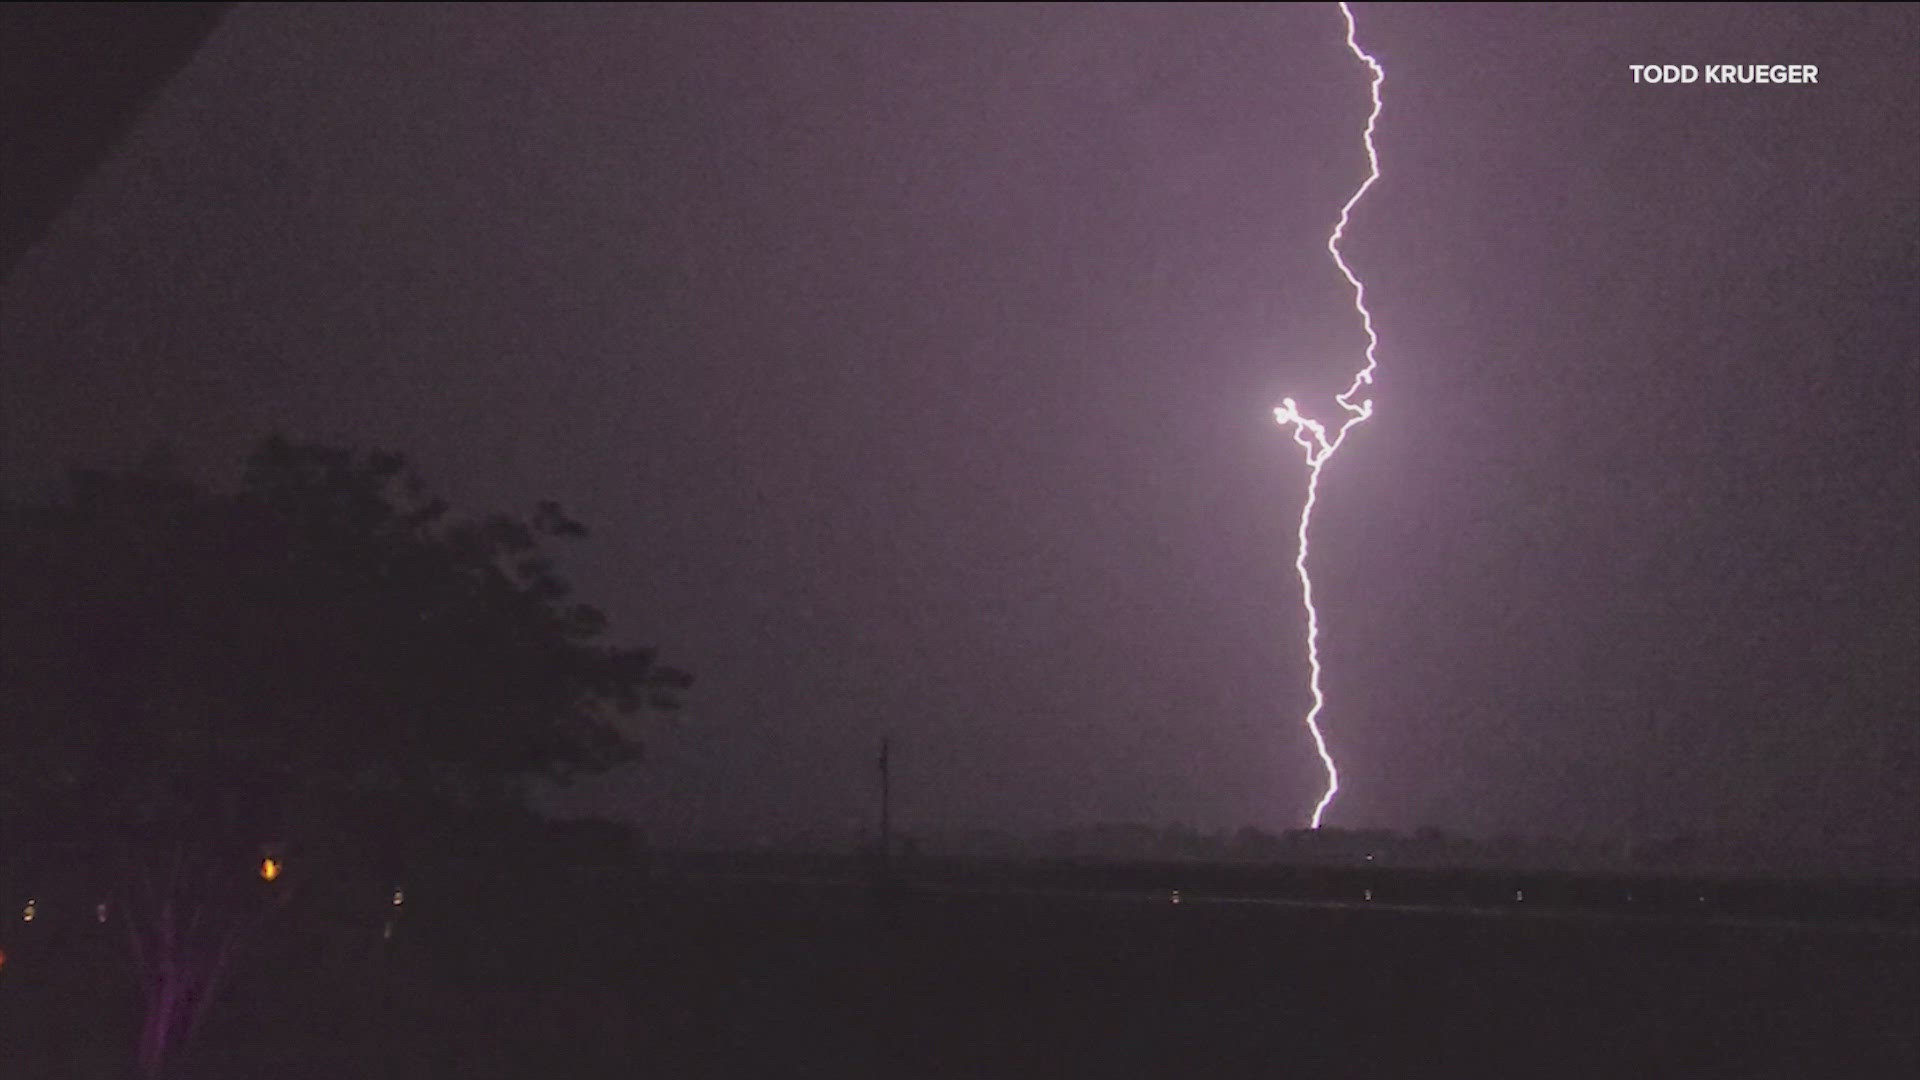 KVUE viewer Todd Krueger shared some lightning photos taken between the cities of Taylor and Coupland.